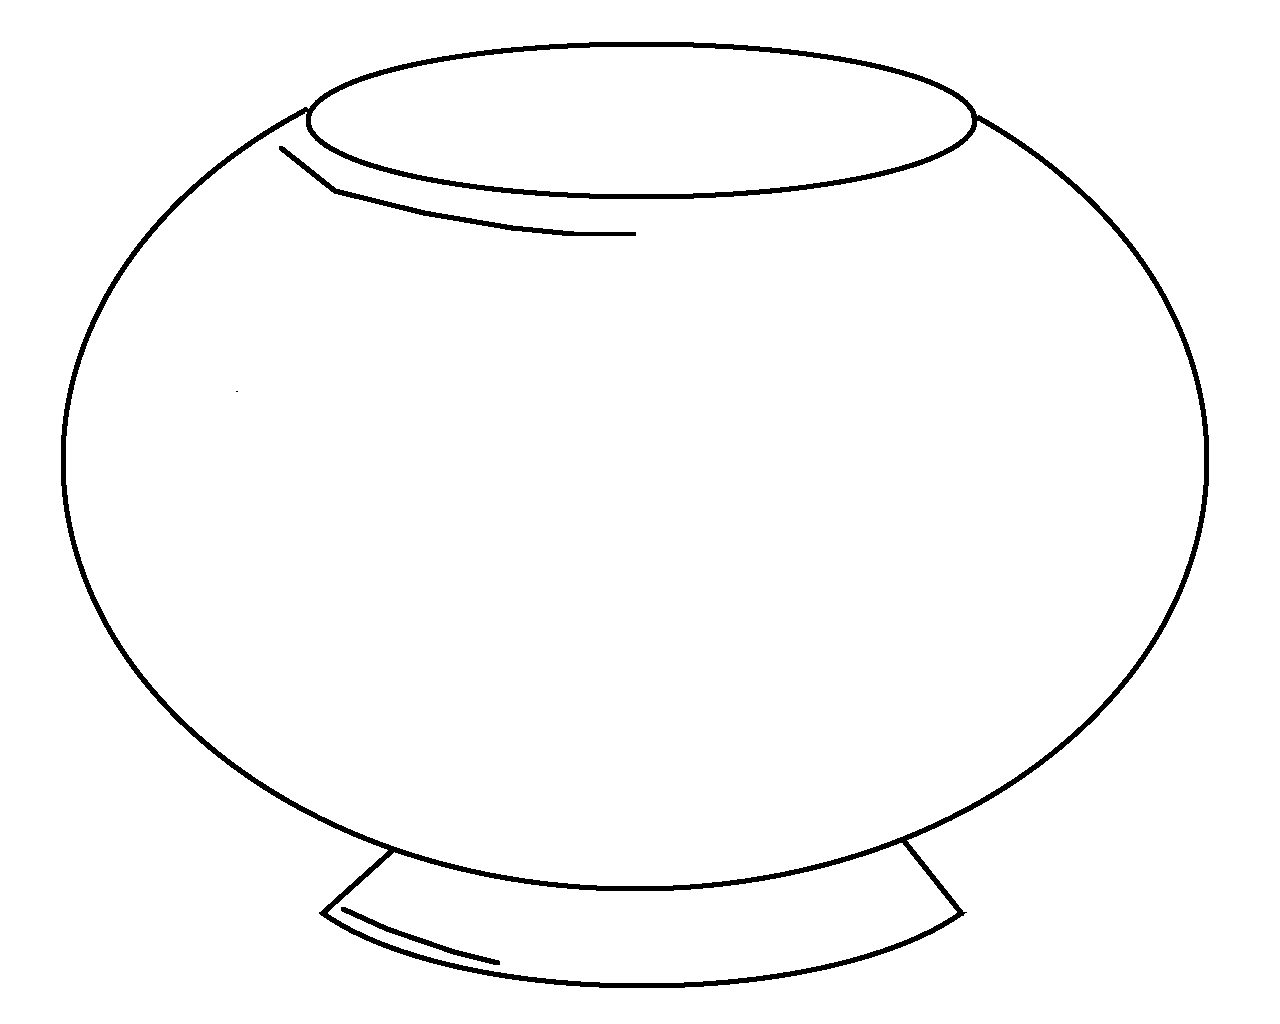 Fish Bowl Black And White Png Image Clipart